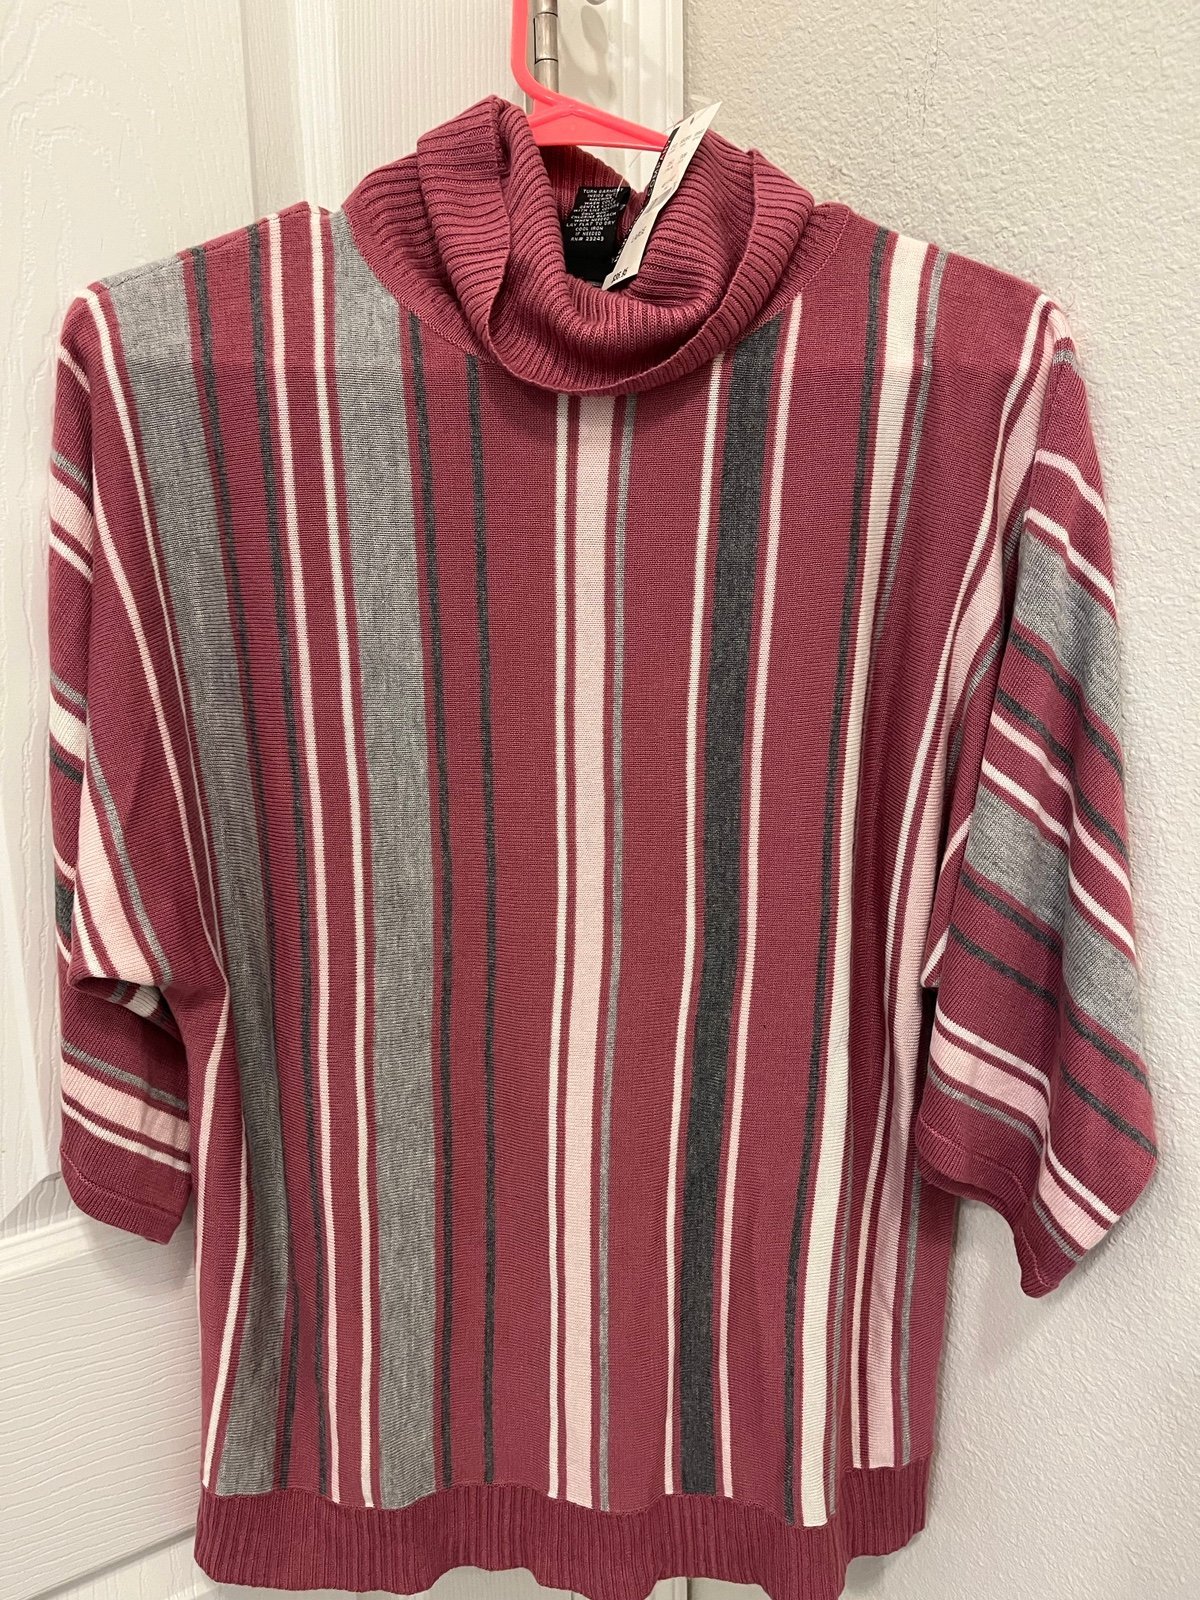 Special offer  Women’s sweater lbQCMVKEs Discount